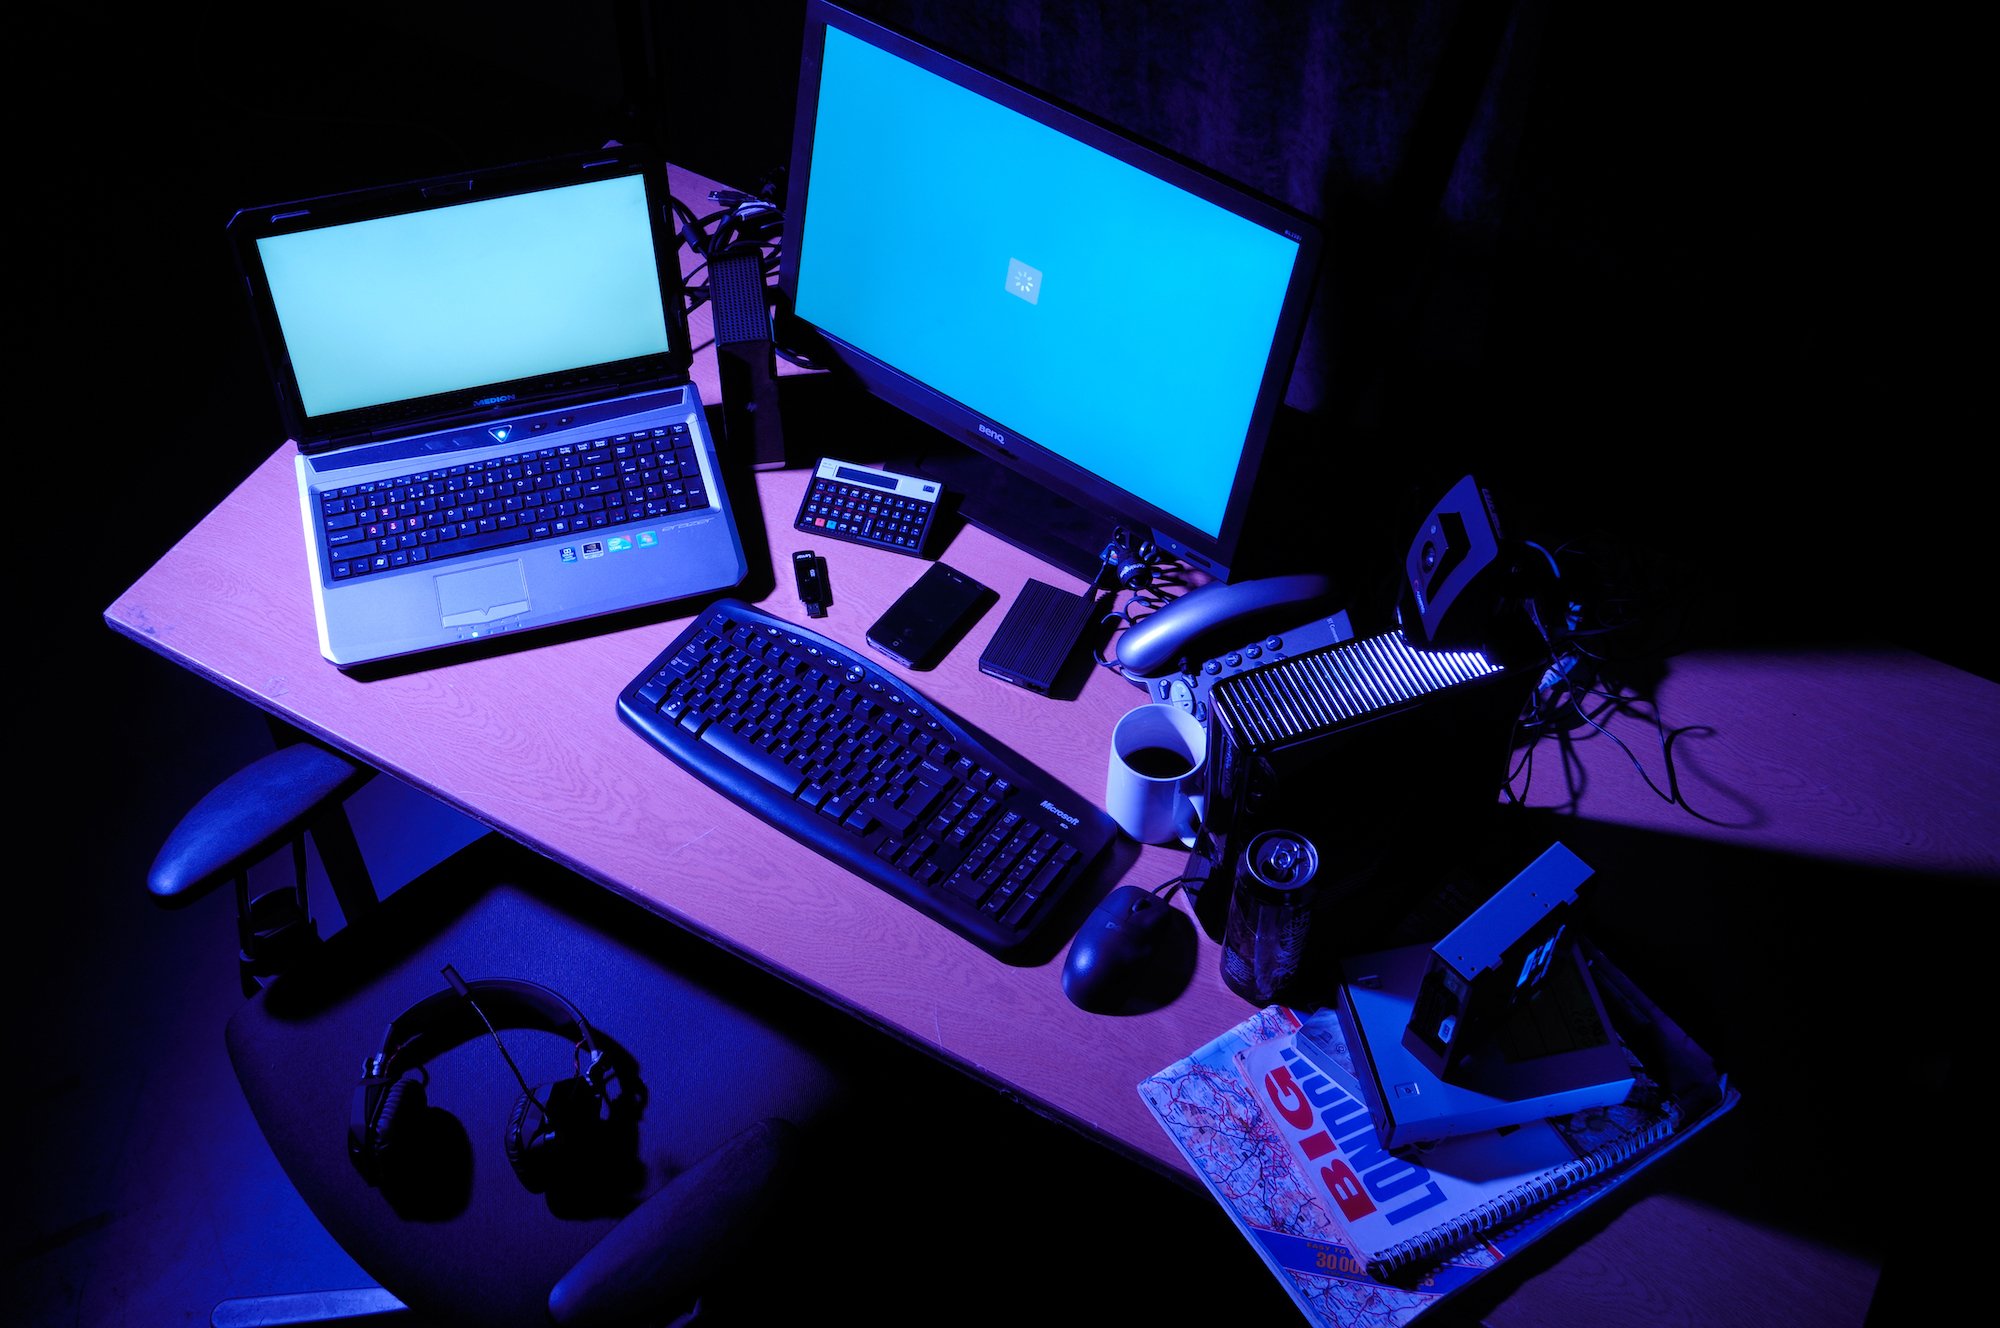 Laptop and desktop computer sitting on a desk with a coffee cup, magazines, pens, and a keyboard